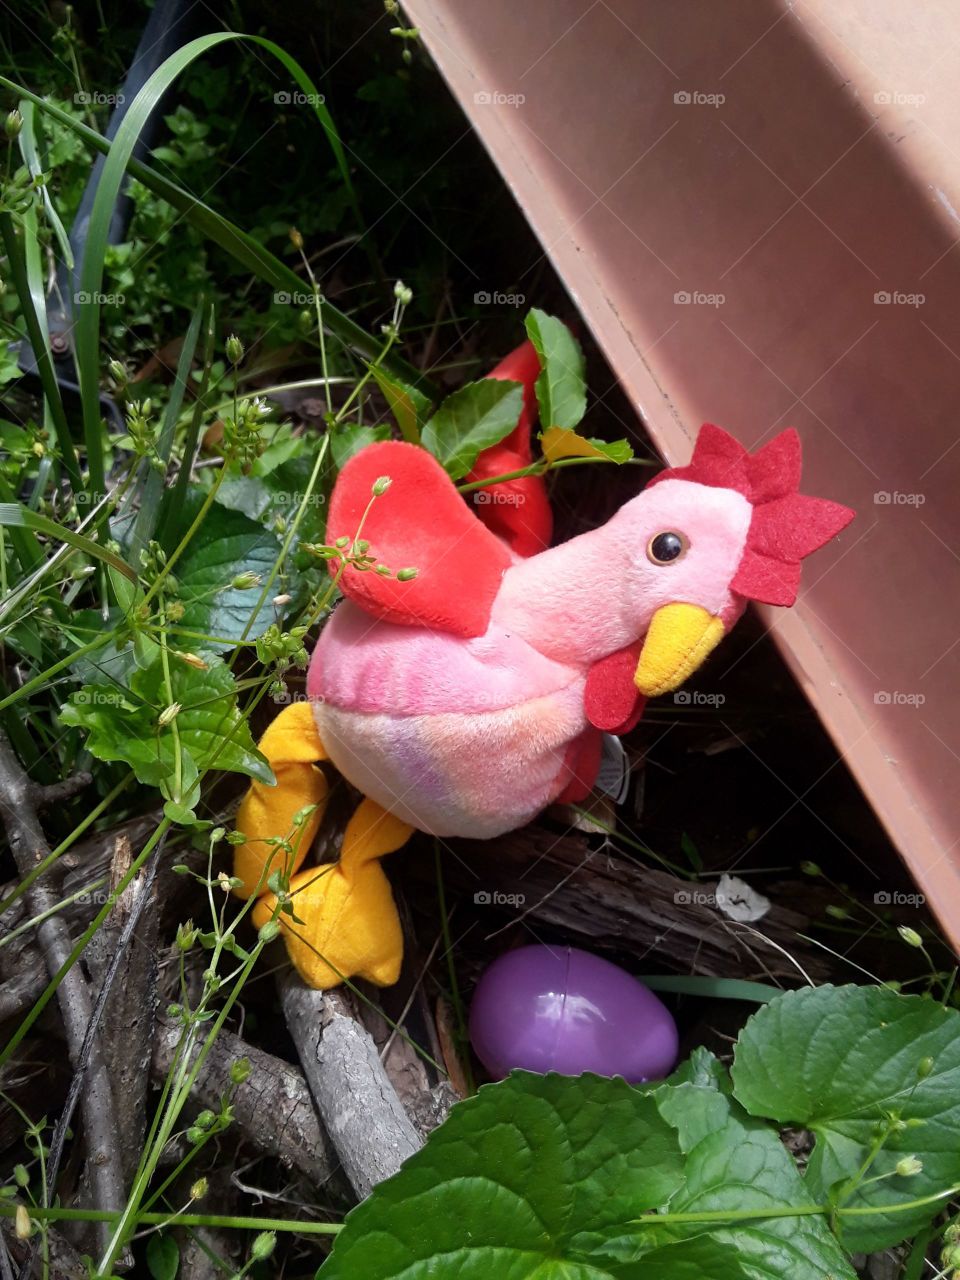 Stuffed Rooster with partly hidden Easter eggs.